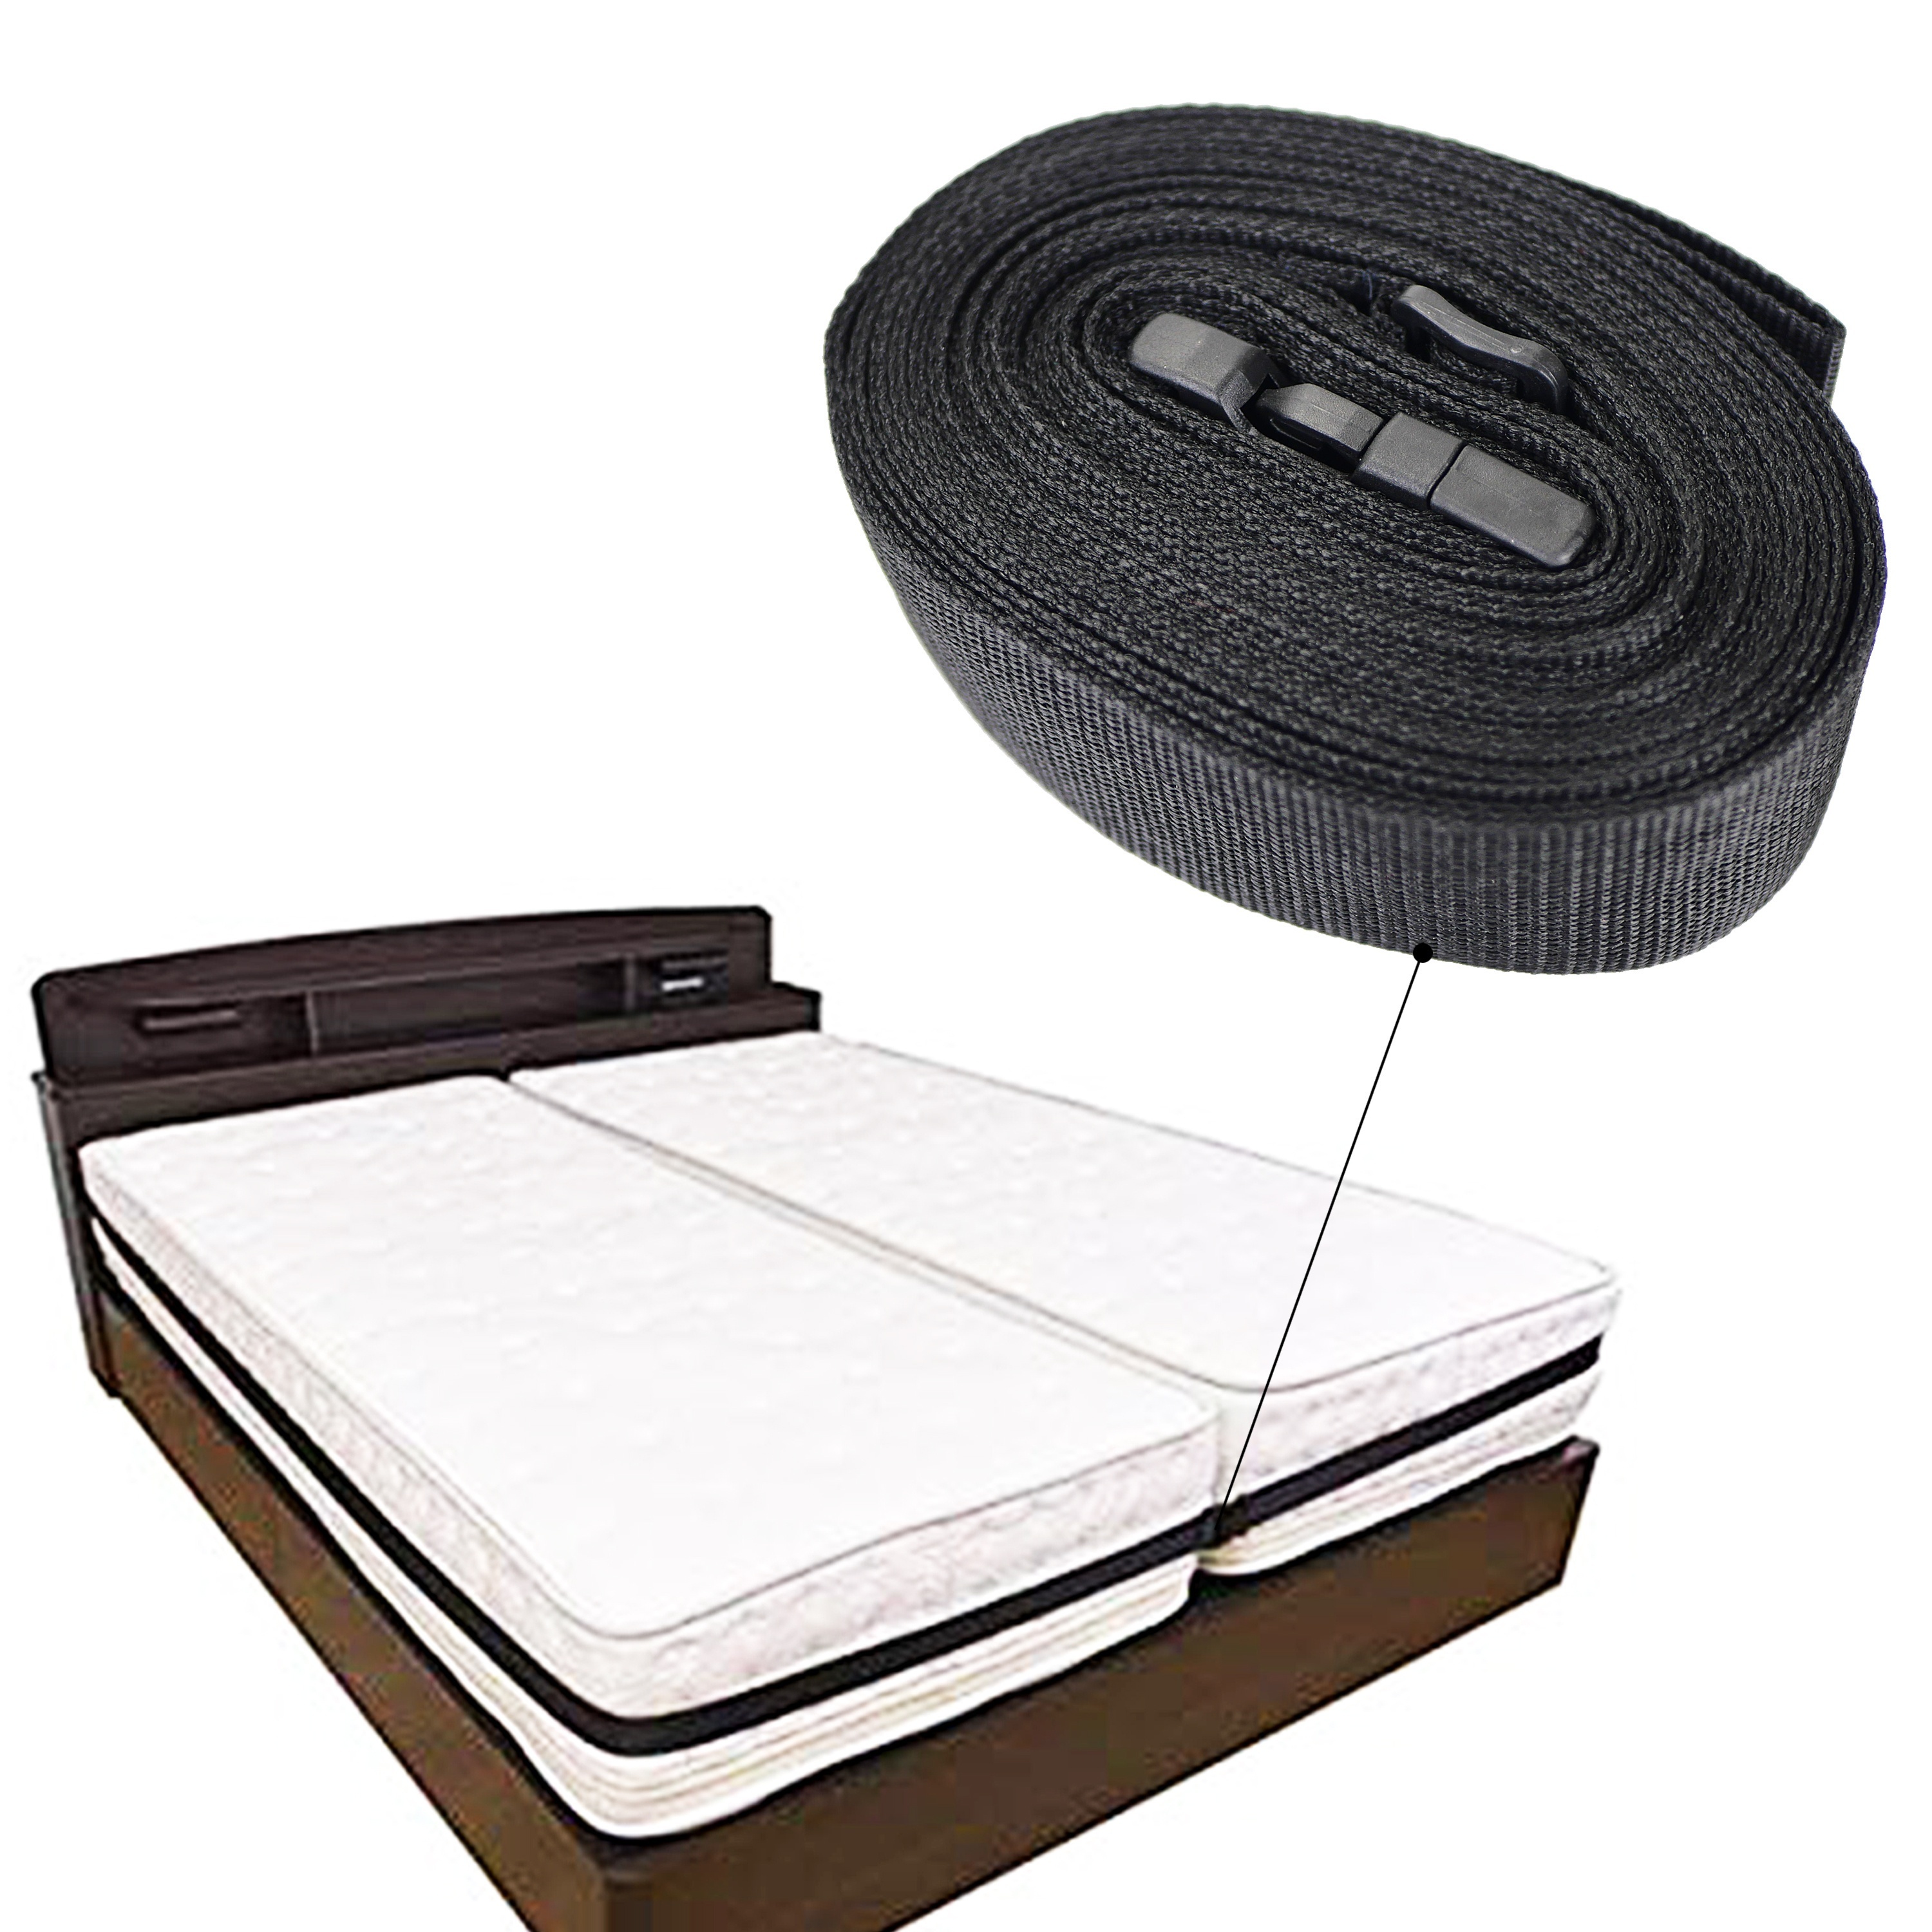 

Easy-connect Bed Joiner Strap - Adjustable Buckle For Seamless Twin To King Or Xl Conversion, 33ft Long Nylon Connector